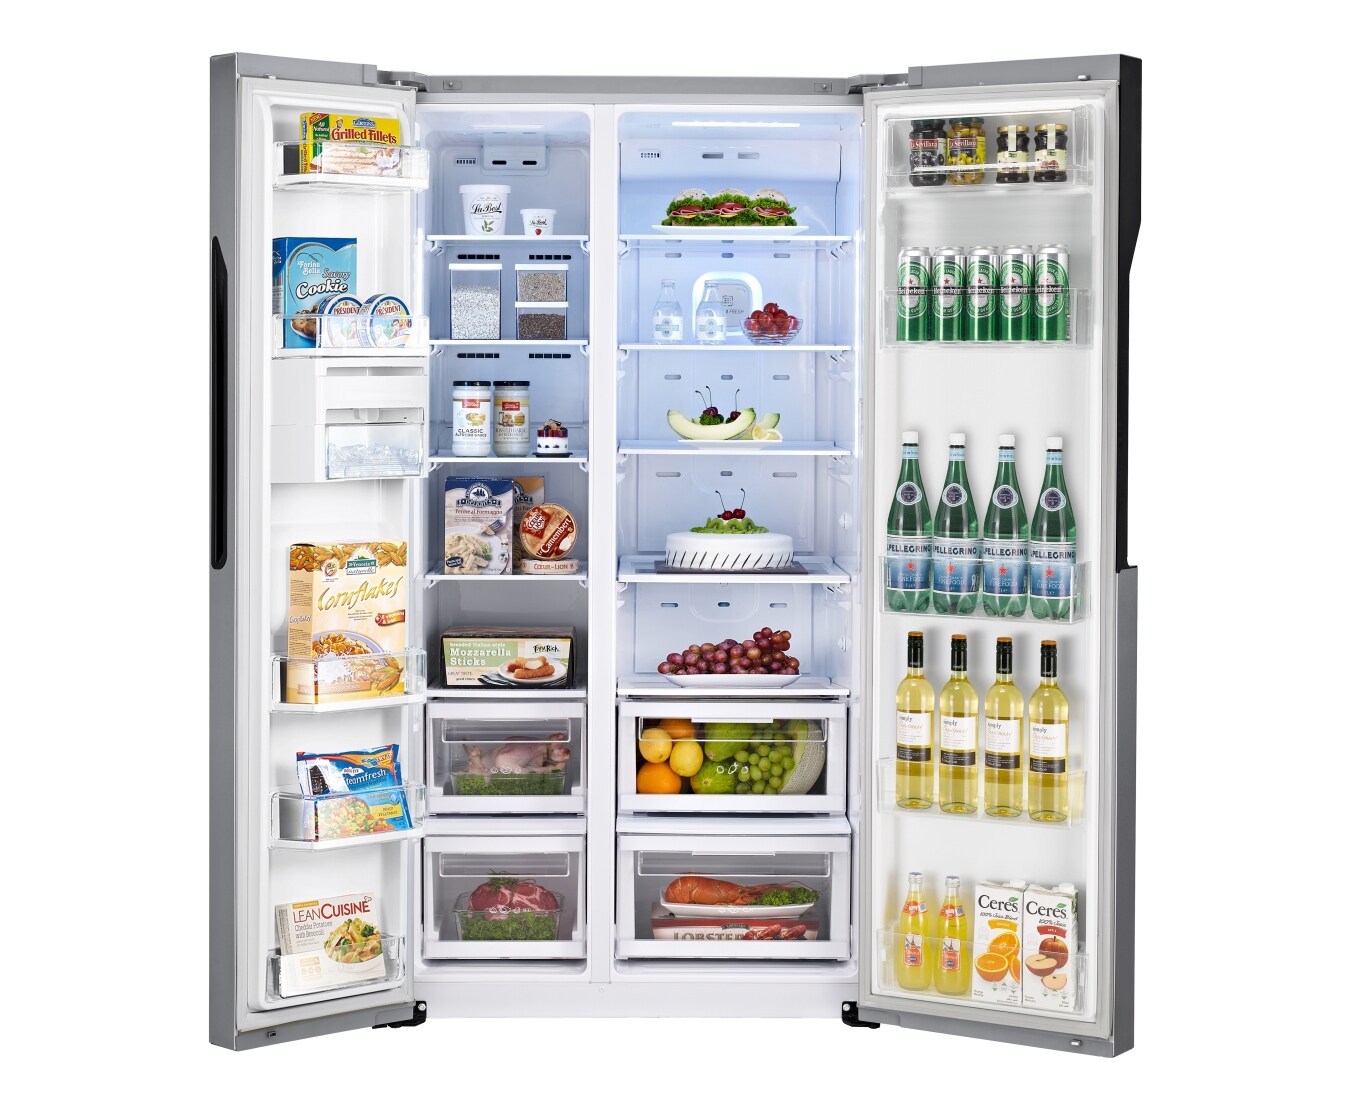 GS B679PL 679L Side By Side Refrigerator With 3 Star Energy Rating 